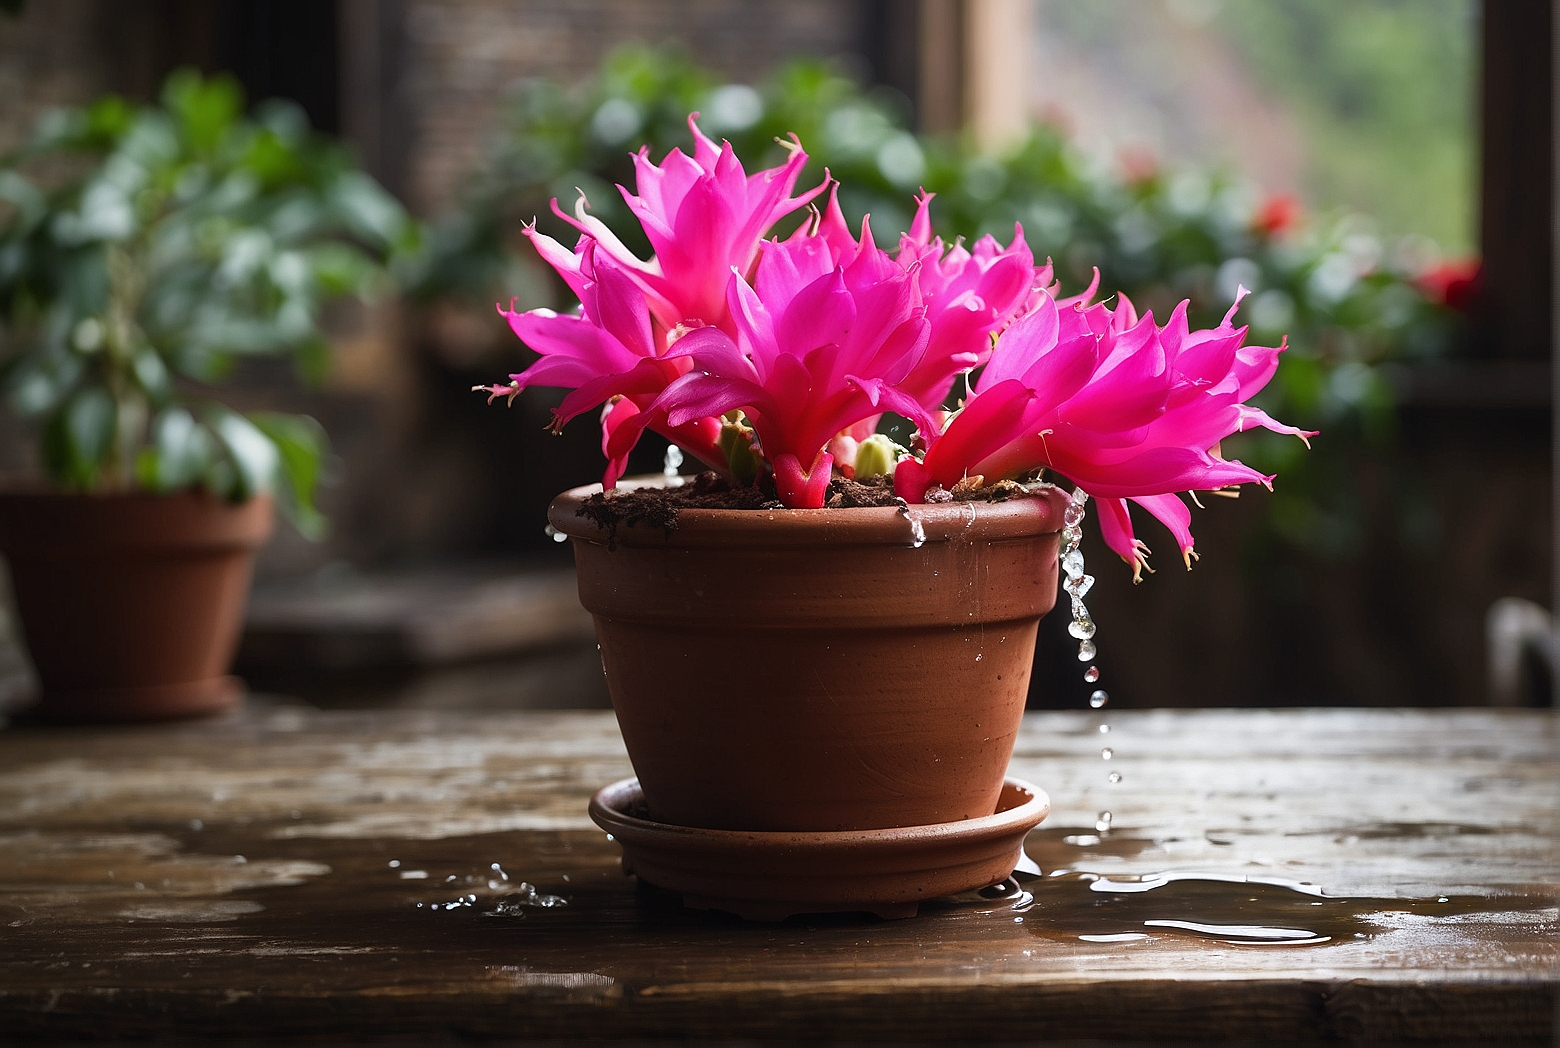 When is the Right Time to Stop Watering a Christmas Cactus?